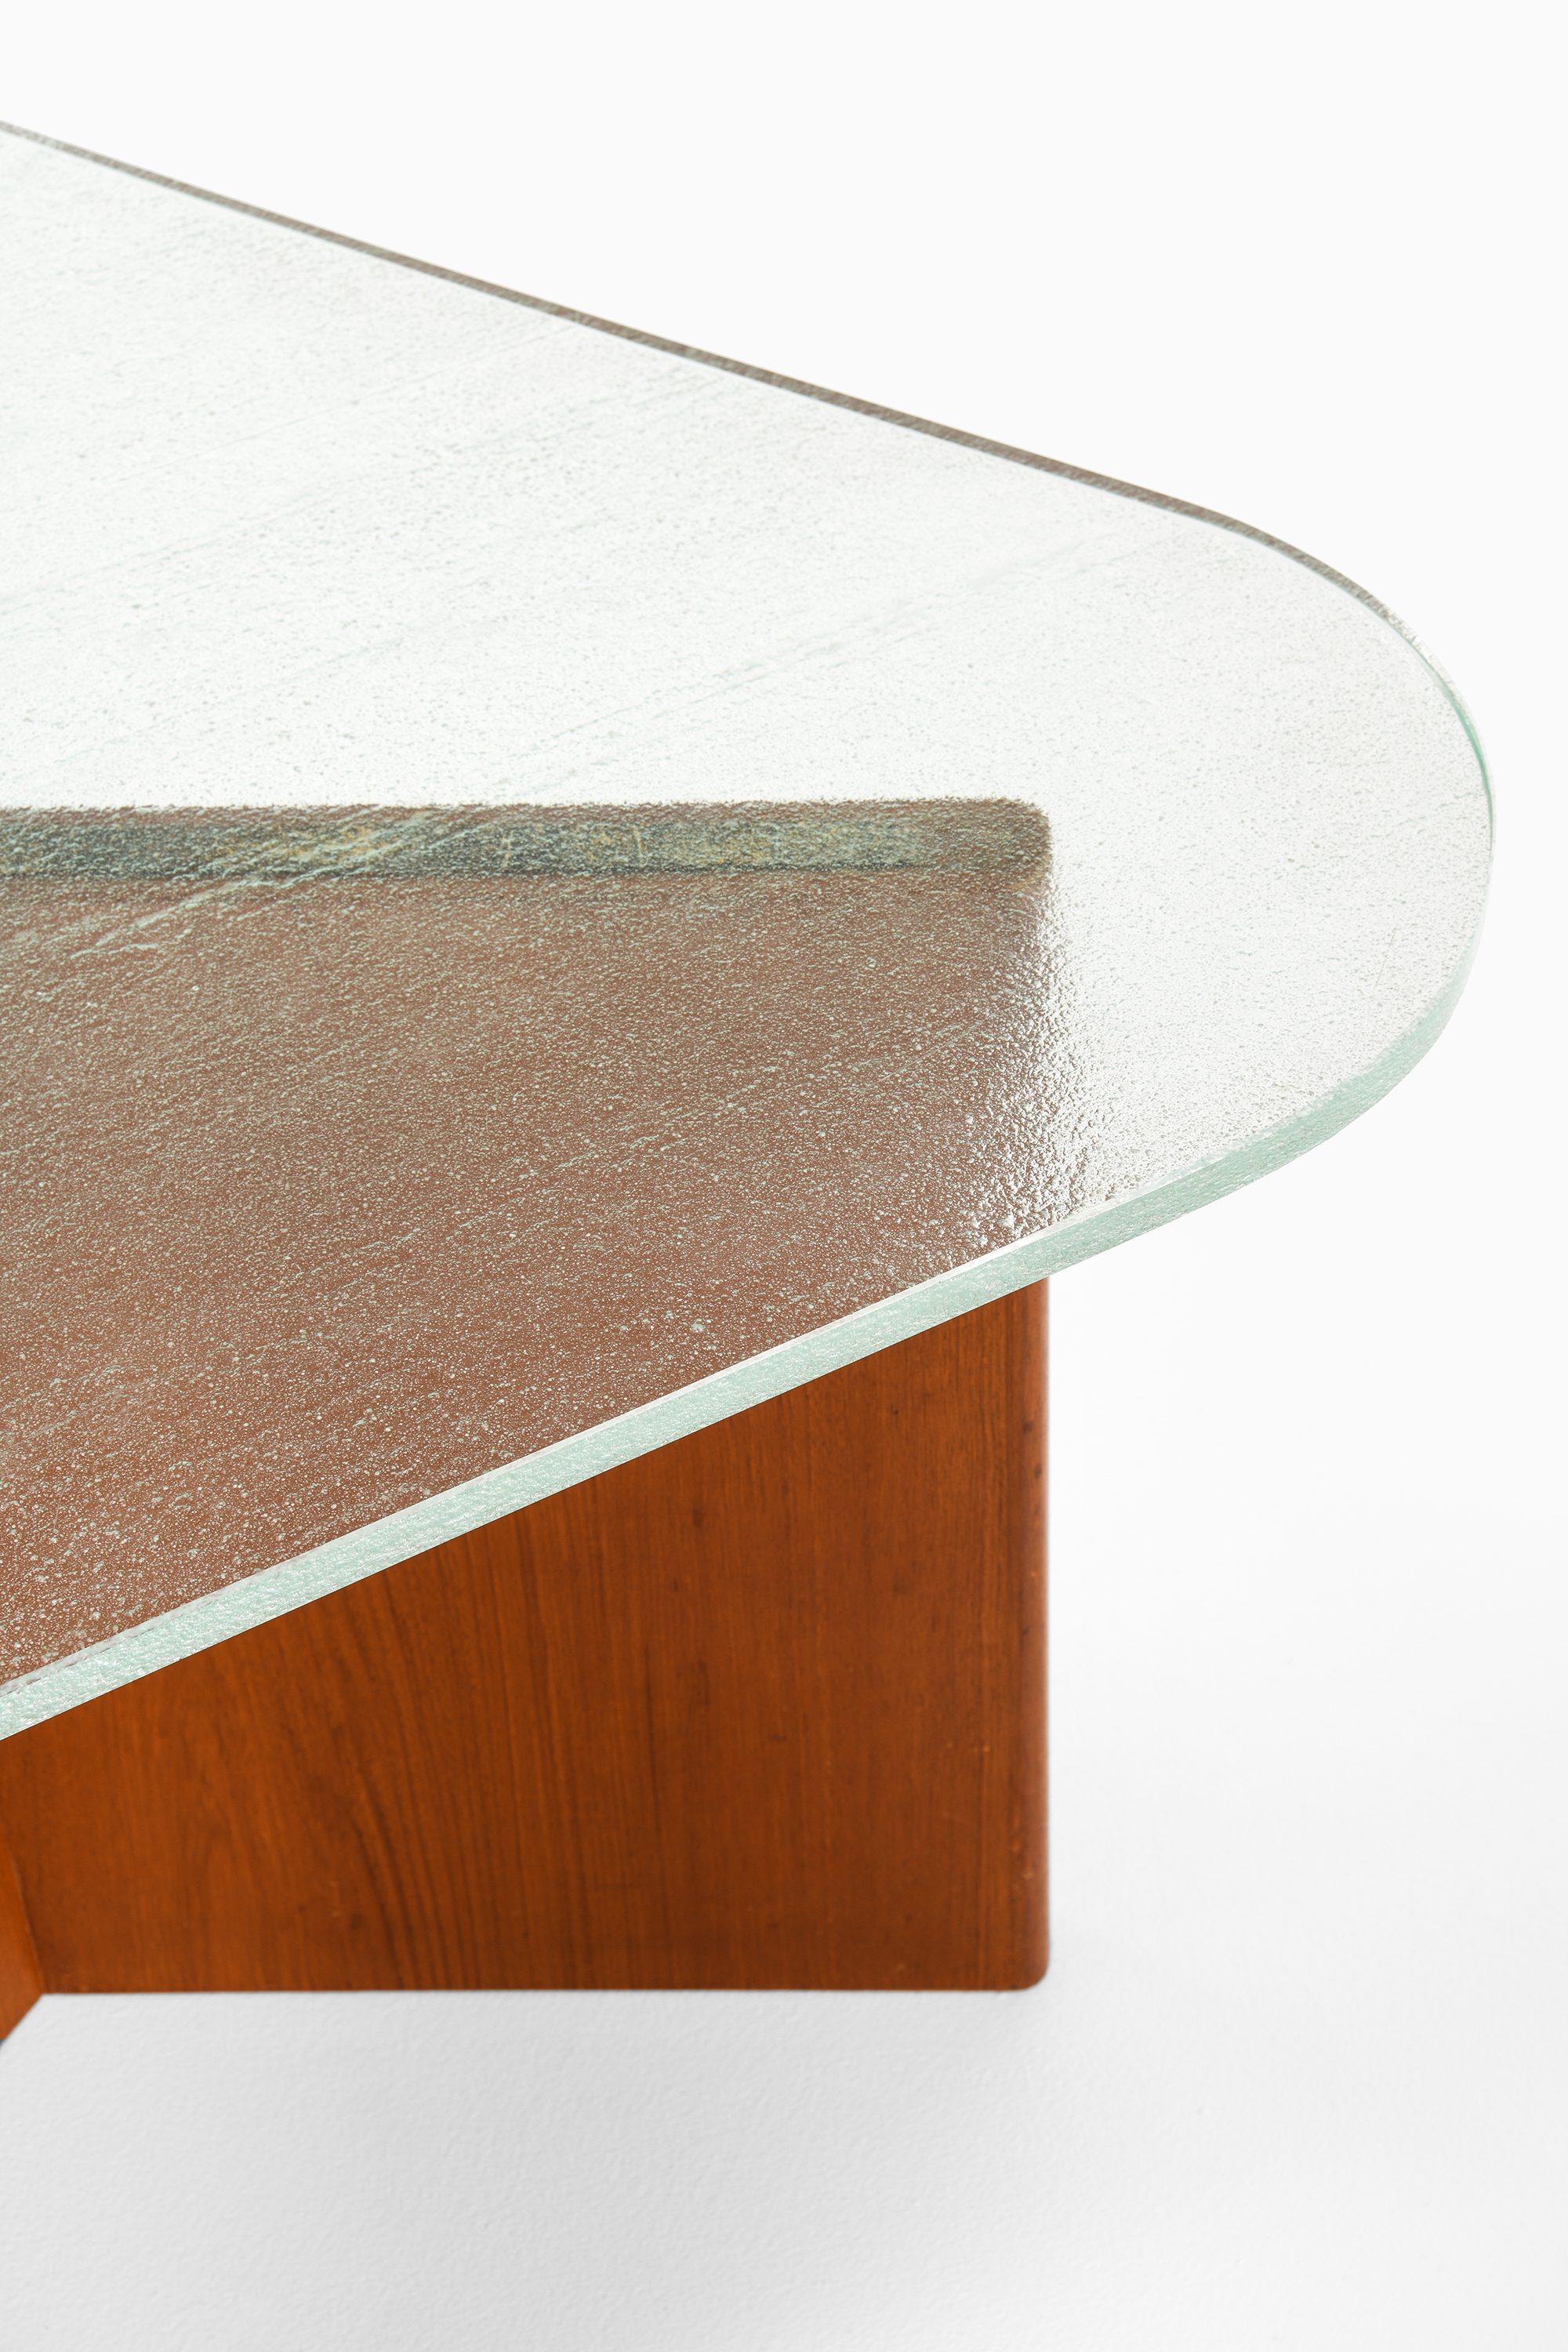 20th Century Triangular Coffee Table in Elm and Raw Glass Top by Axel Einar Hjorth, 1940's For Sale